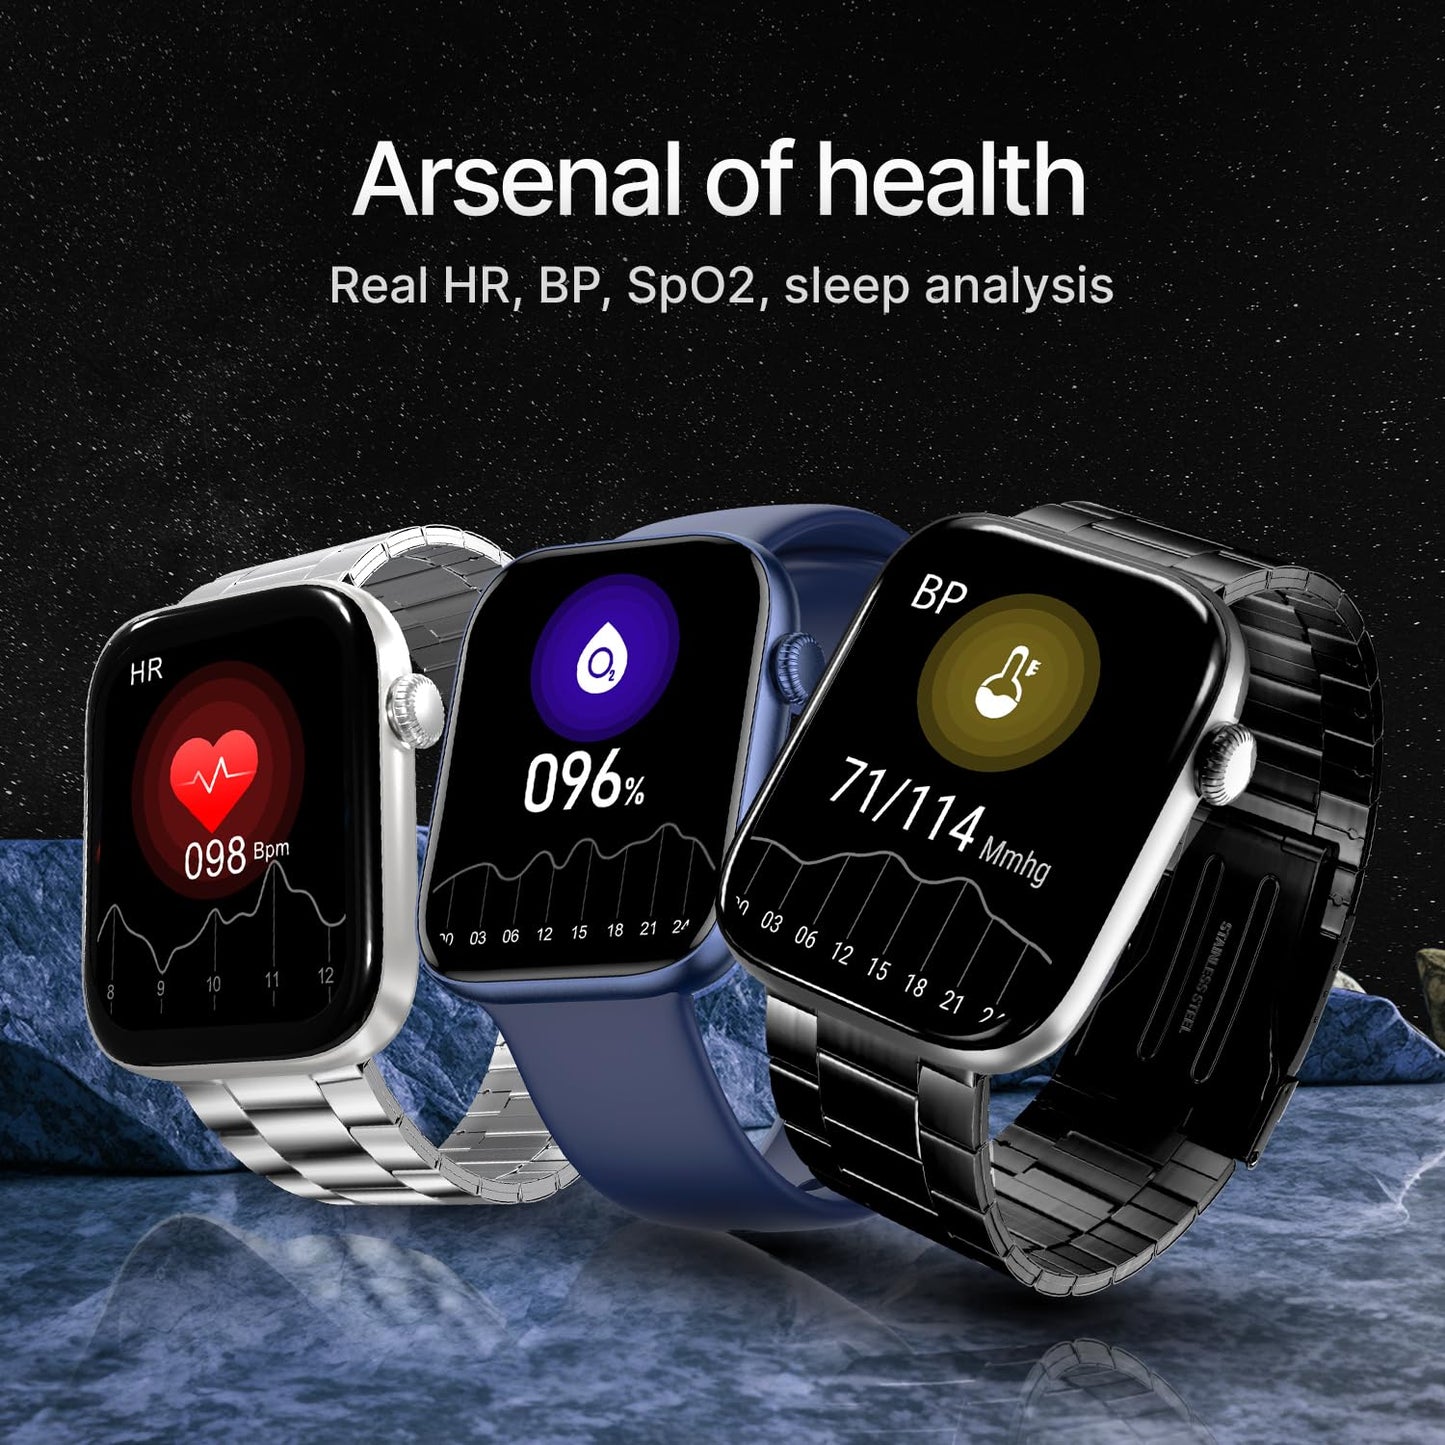 CrossBeats Stellr Newly launched Large 2.01" AMOLED Display 1000 NITS BT Calling Luxury High Resolution Smart Watch for Men Women |Health Tracking| Fast Charge 7days Battery| AI Voice Assistant -Blue